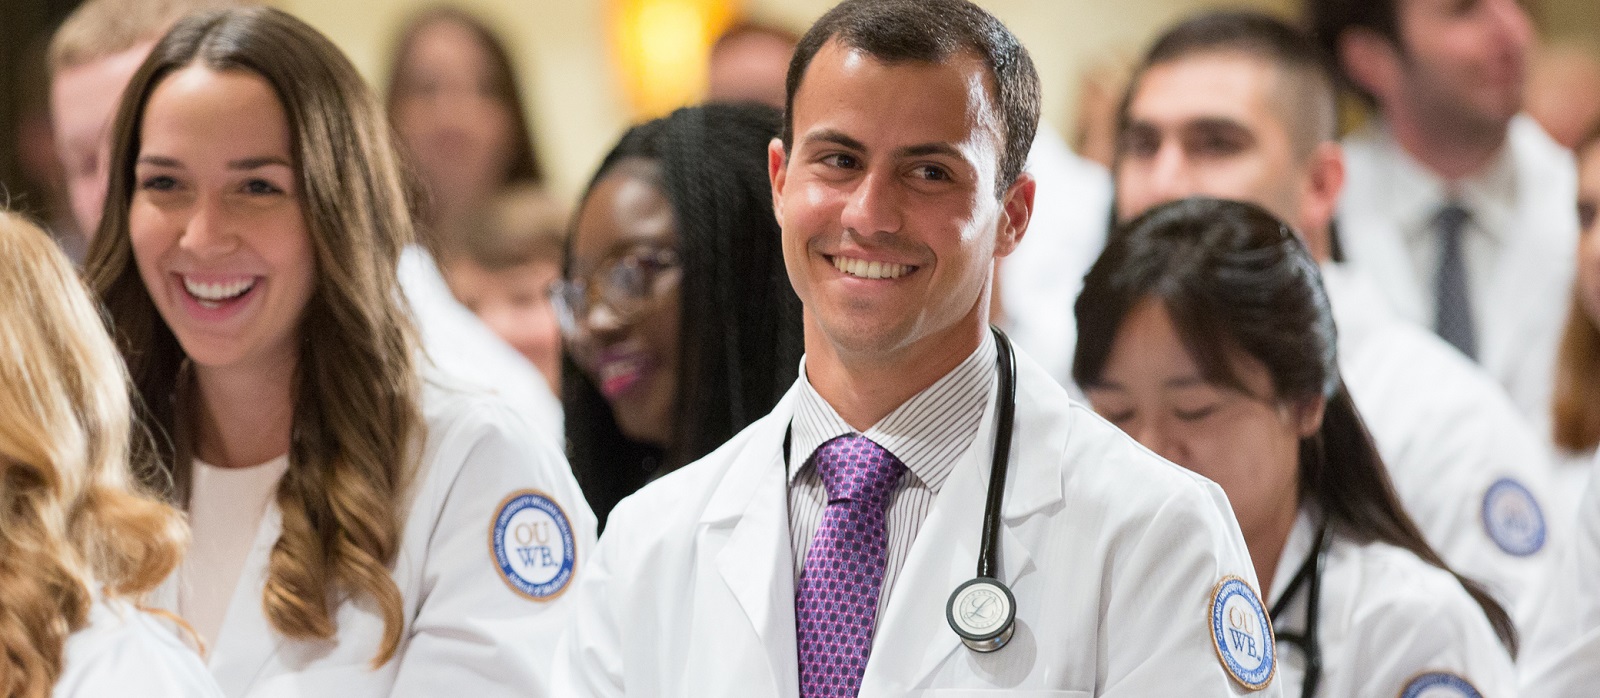 A student smiles as he stands in the crowd at the White Coat ceremony.